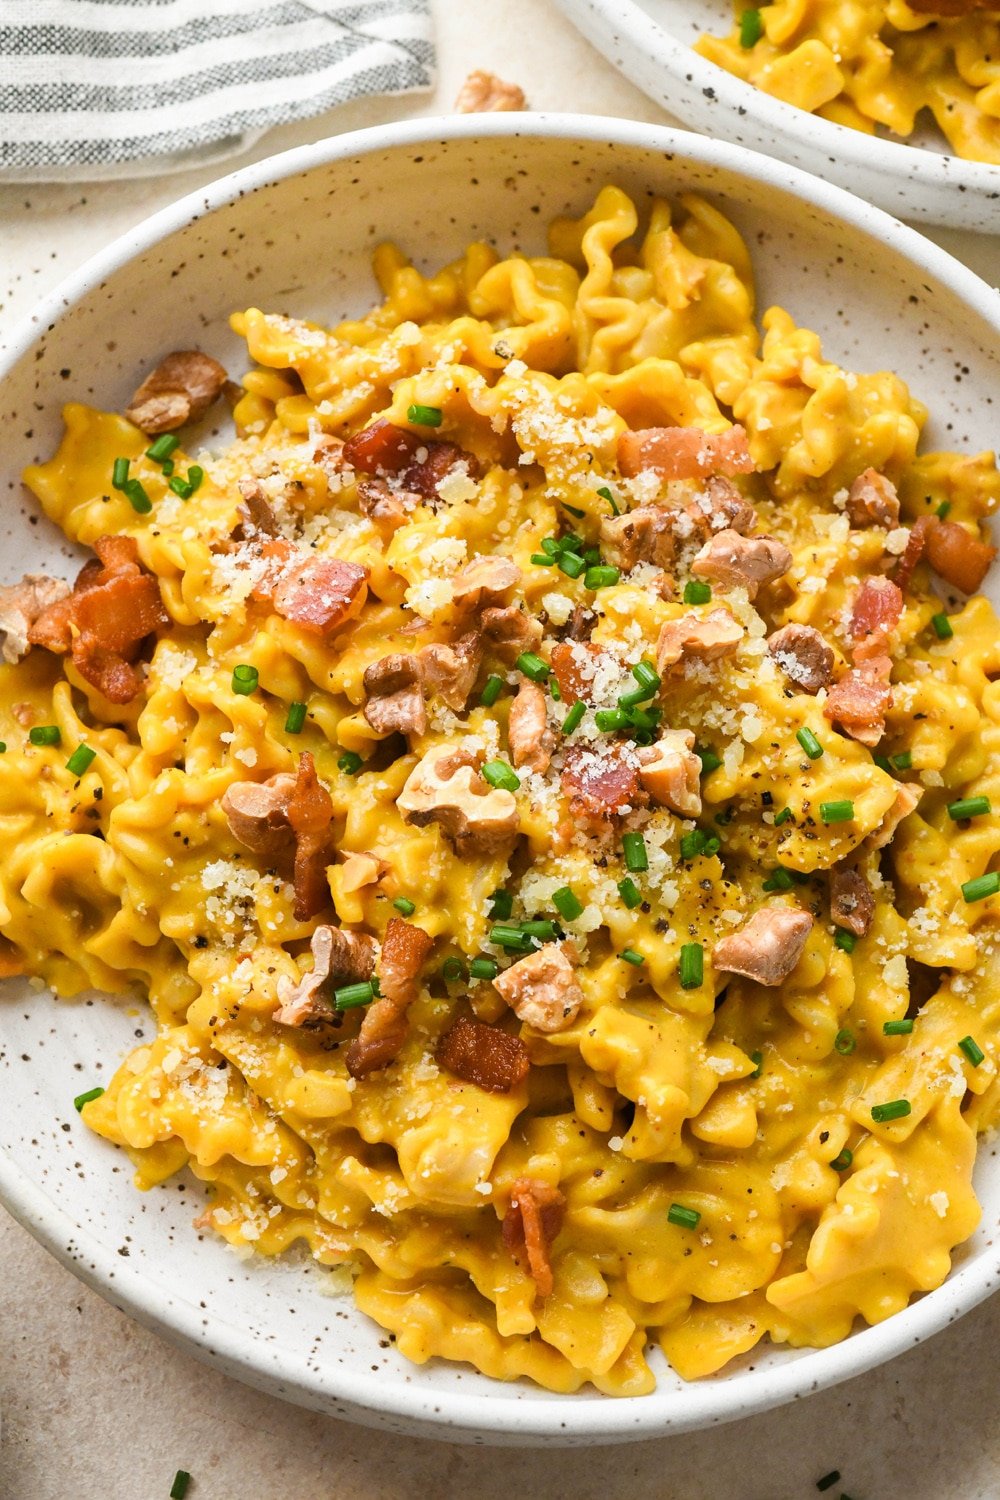 Creamy, dairy free butternut squash pasta with bacon, walnuts, and chives, in a shallow speckled ceramic bowl on a light cream background, next to a striped napkin and a second bowl of pasta.